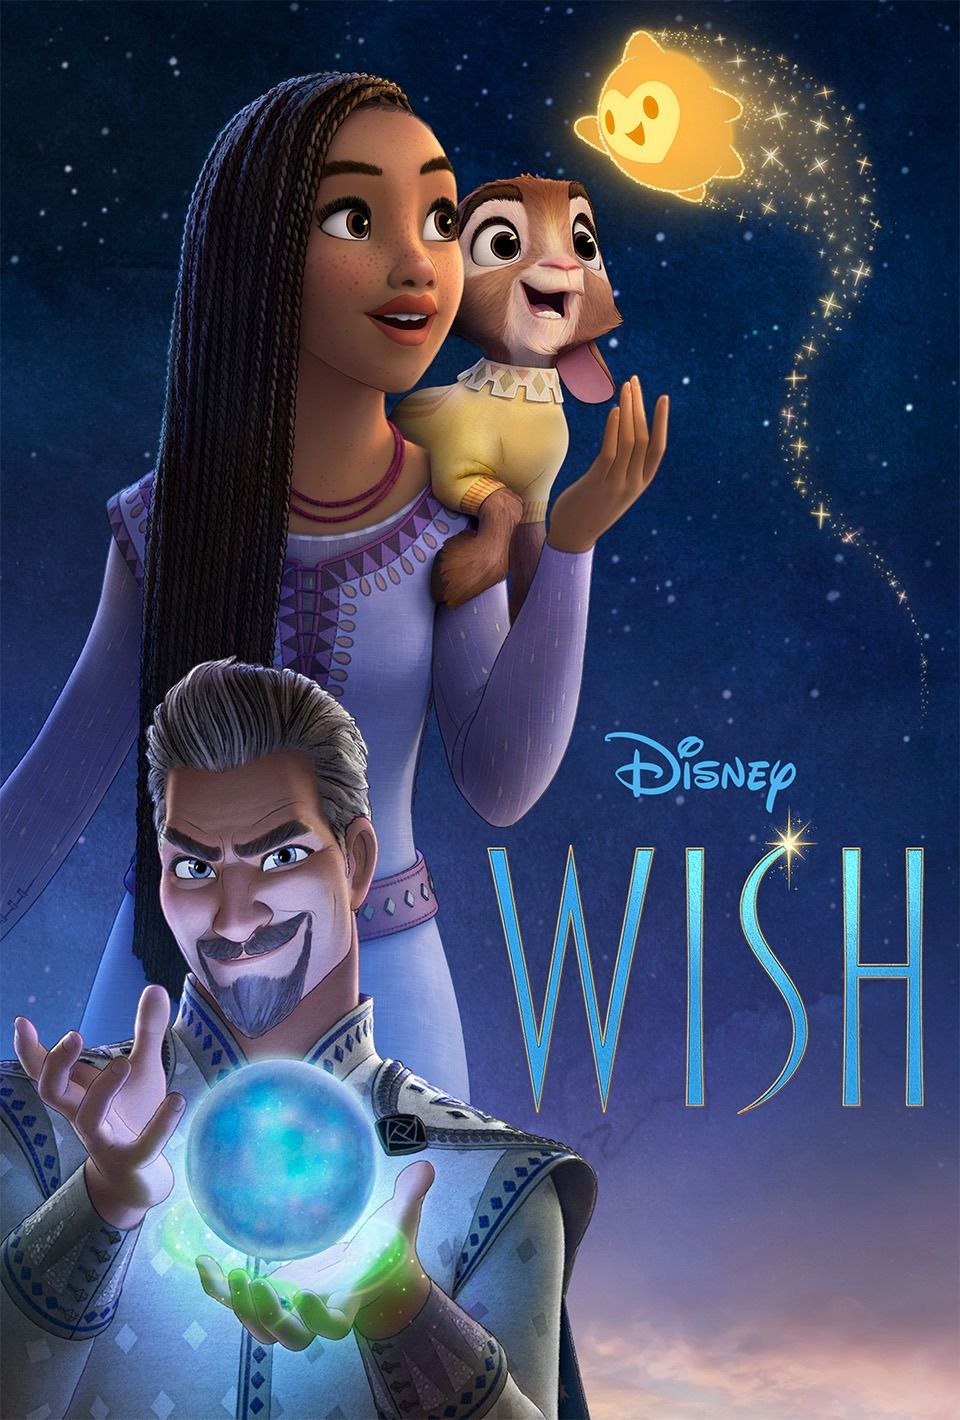 Poster for the Disney movie, Wish.